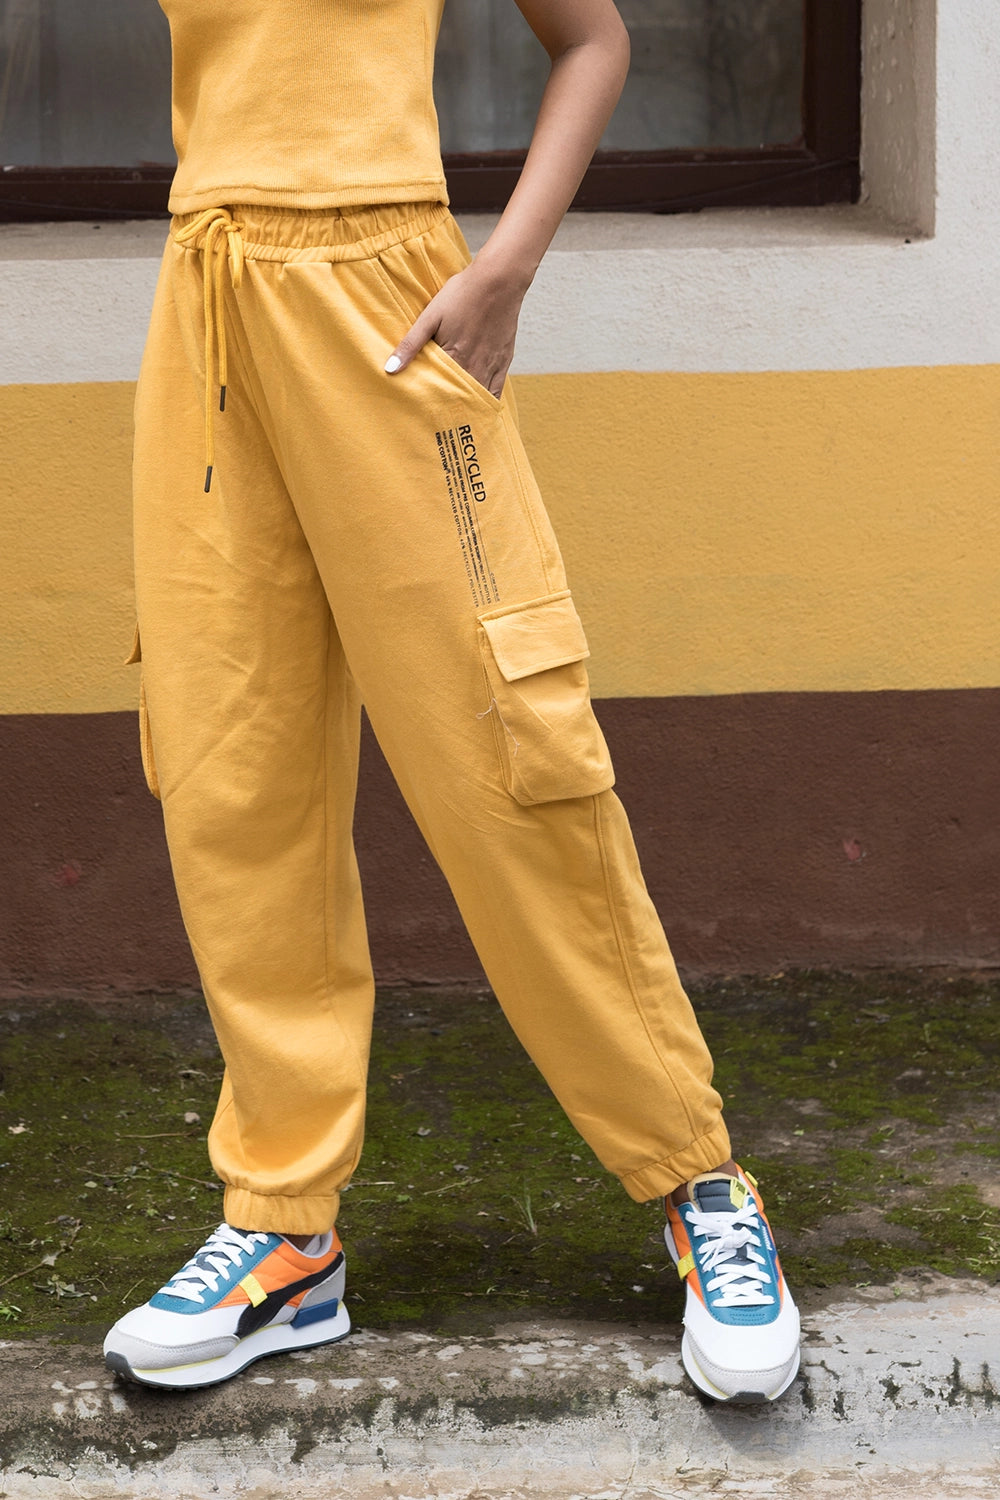 Trendy Comfortable jogger Pants for Girls and Young Womens  Yellow color